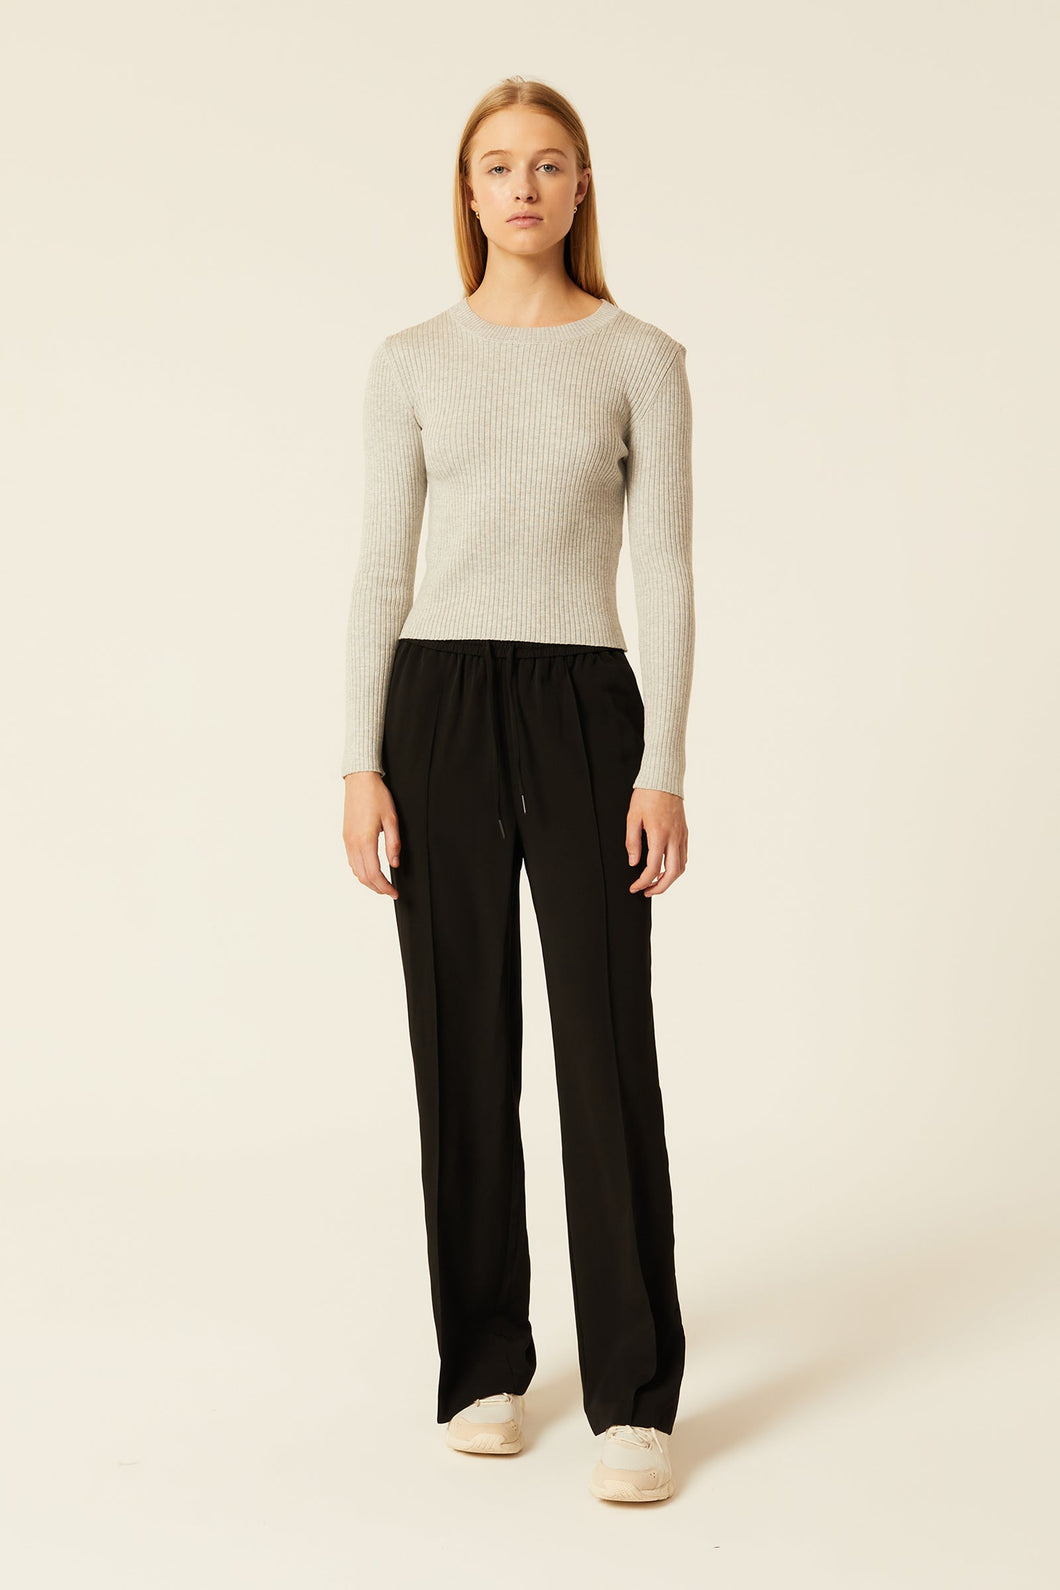 NUDE CLASSIC KNIT IN GREY MARLE